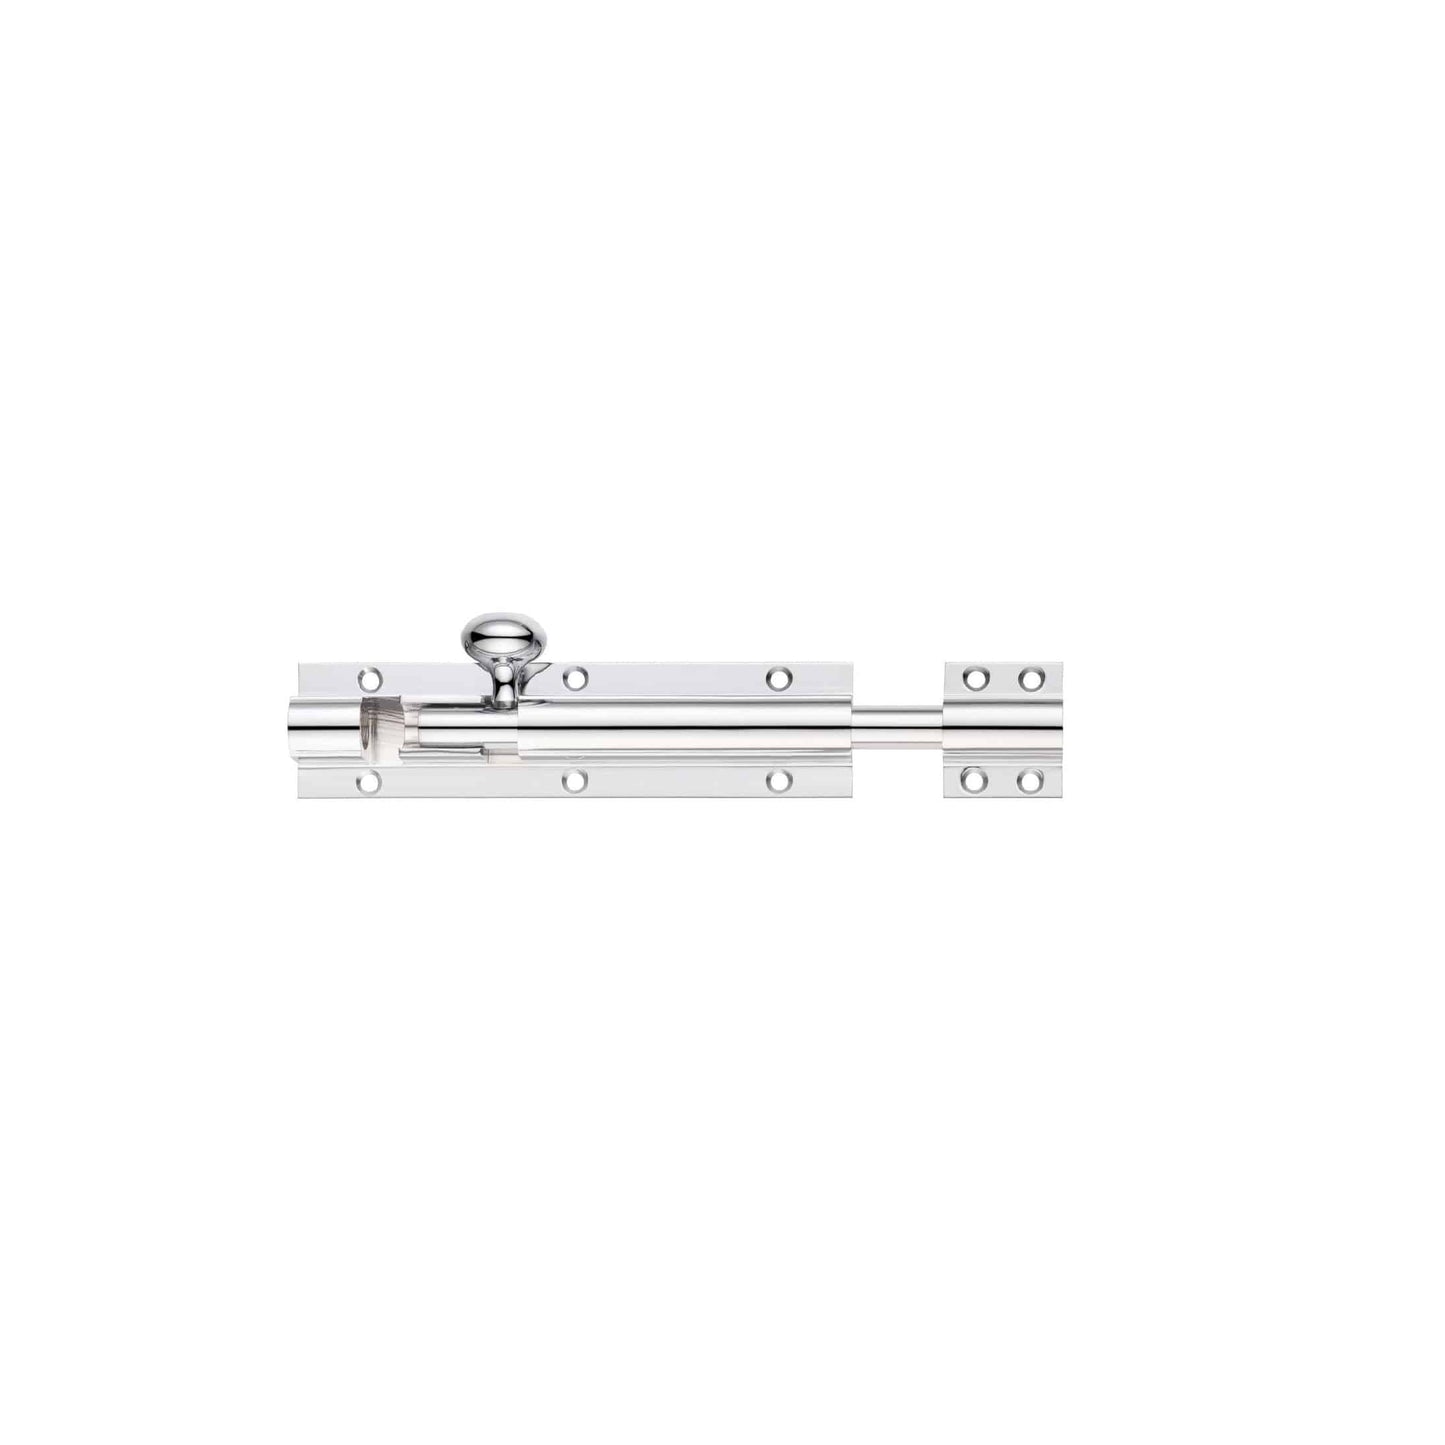 Zoo Architectural Barrel Bolt 100mm x 38mm - Abbey Hardware